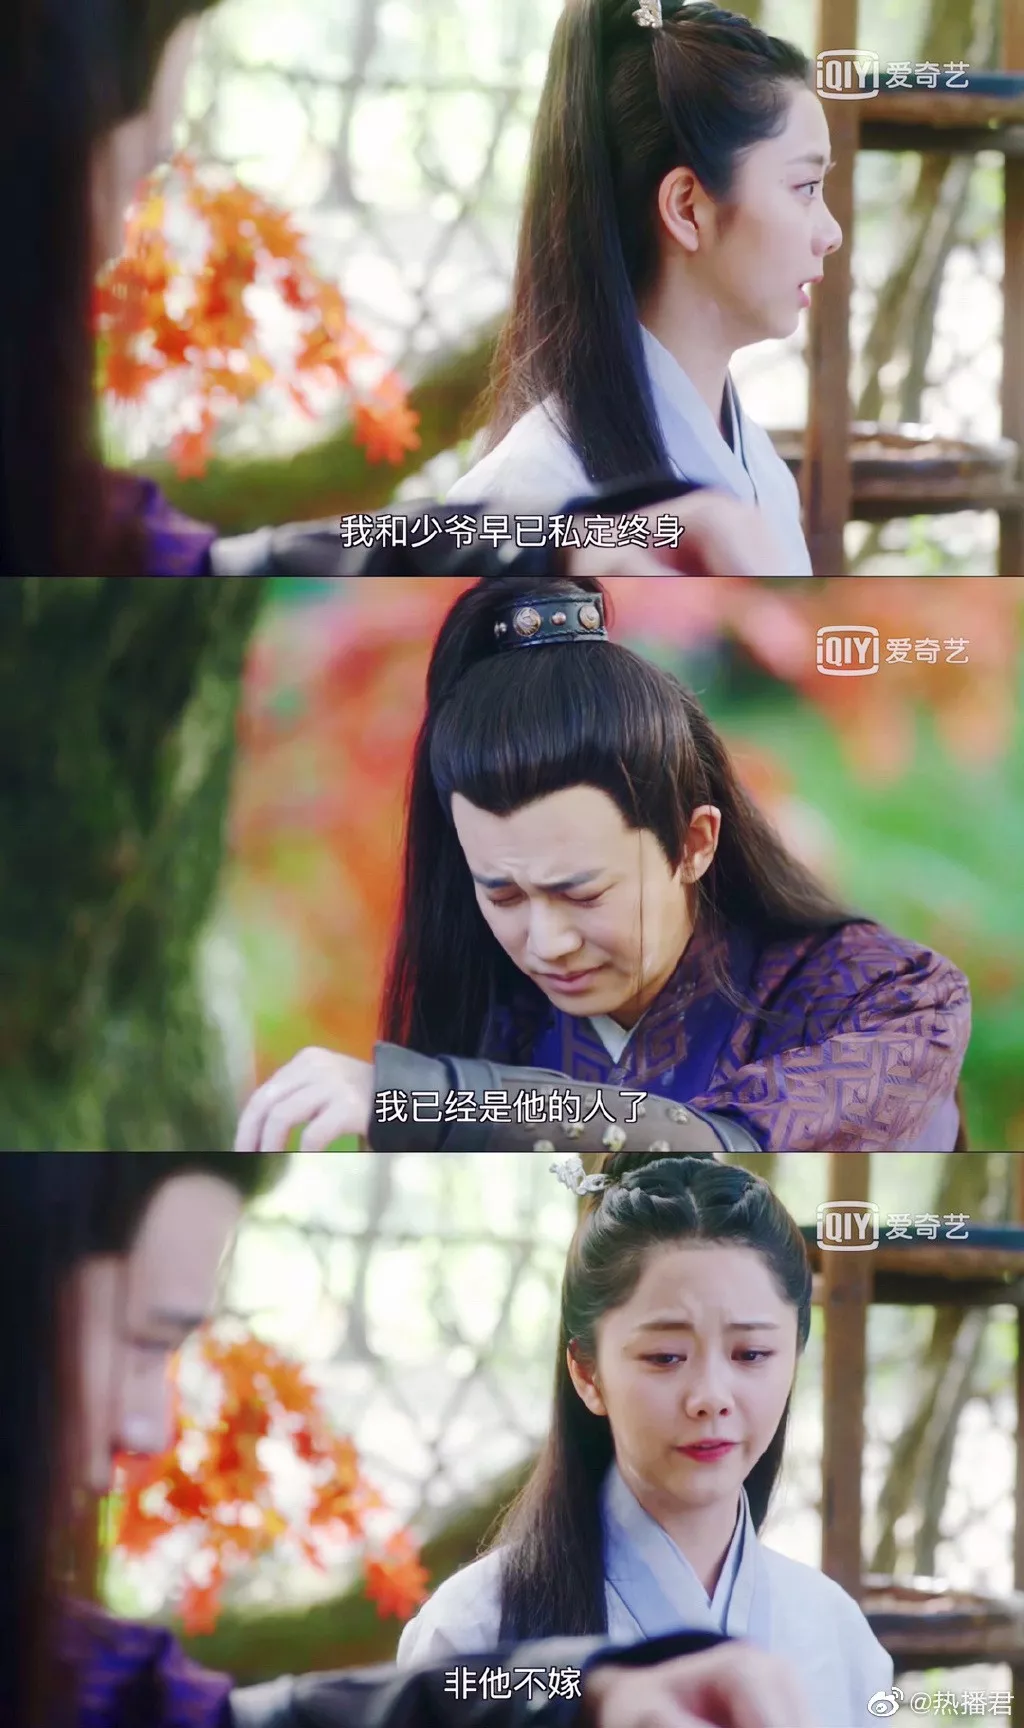 Sun Gonglei is right go up Chen Saicheng, who is just 2019 year of drama king? 